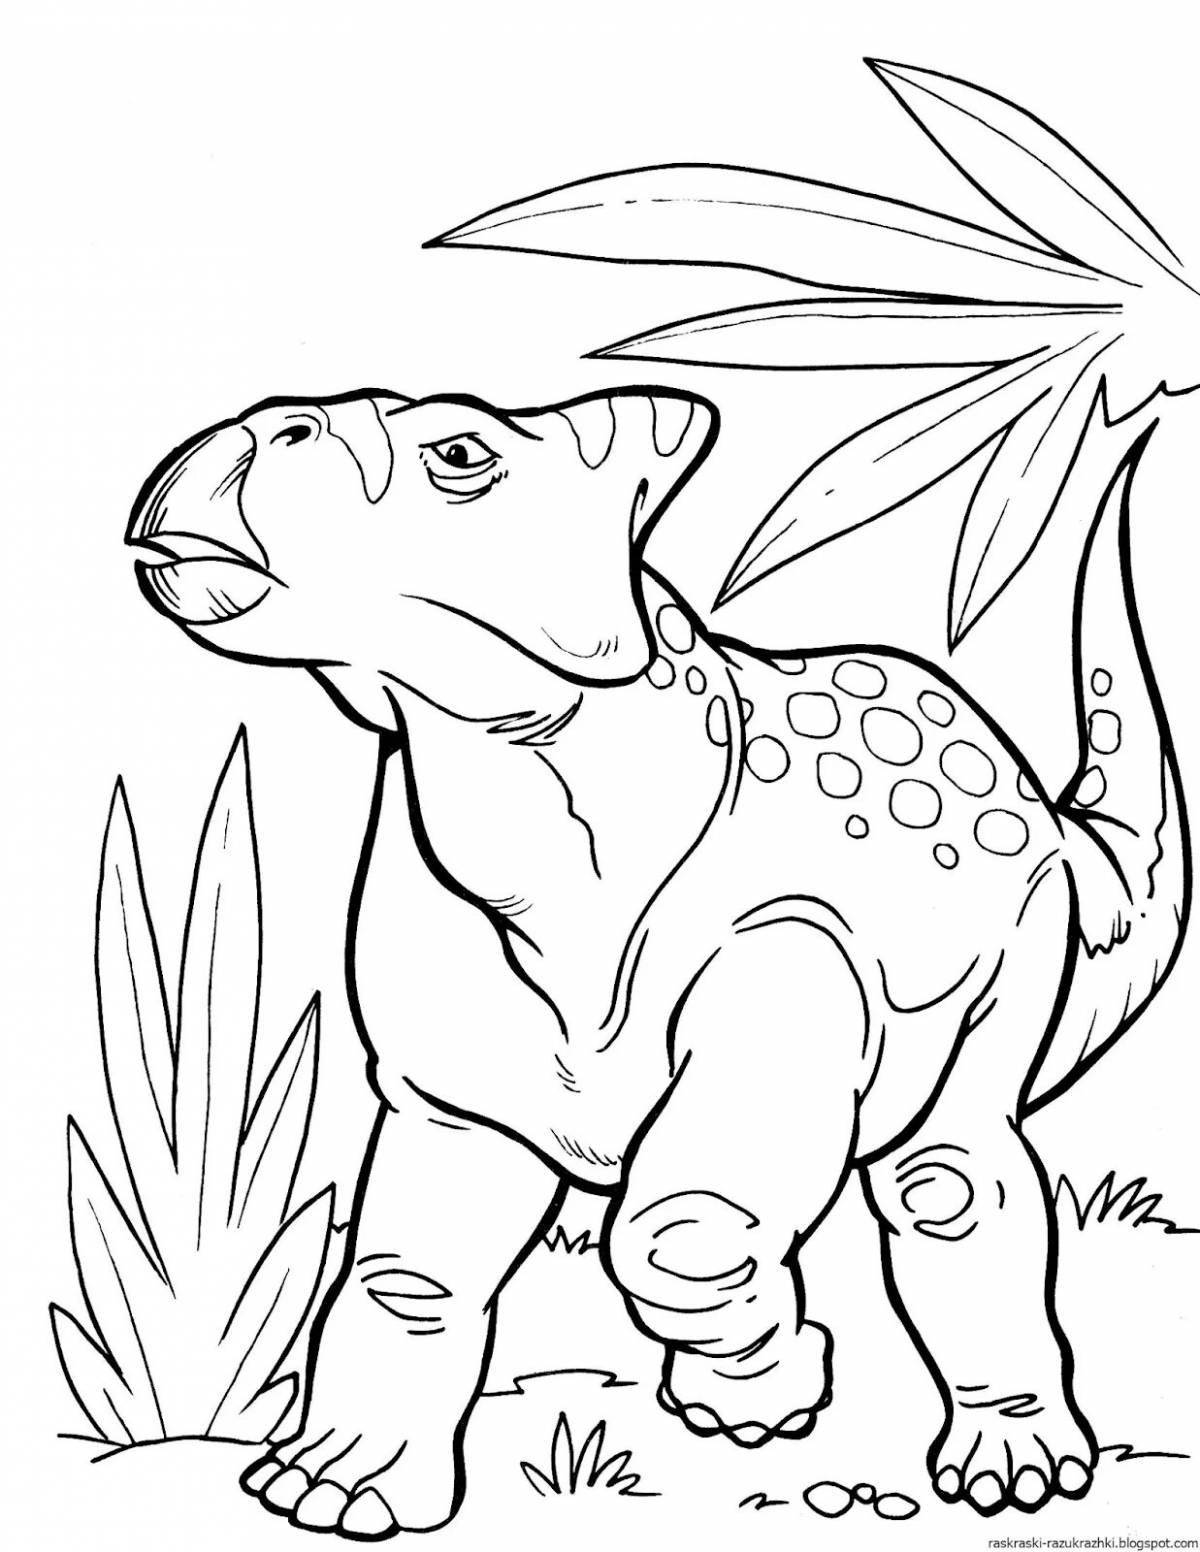 Amazing dinosaurs coloring book for kids 5-8 years old